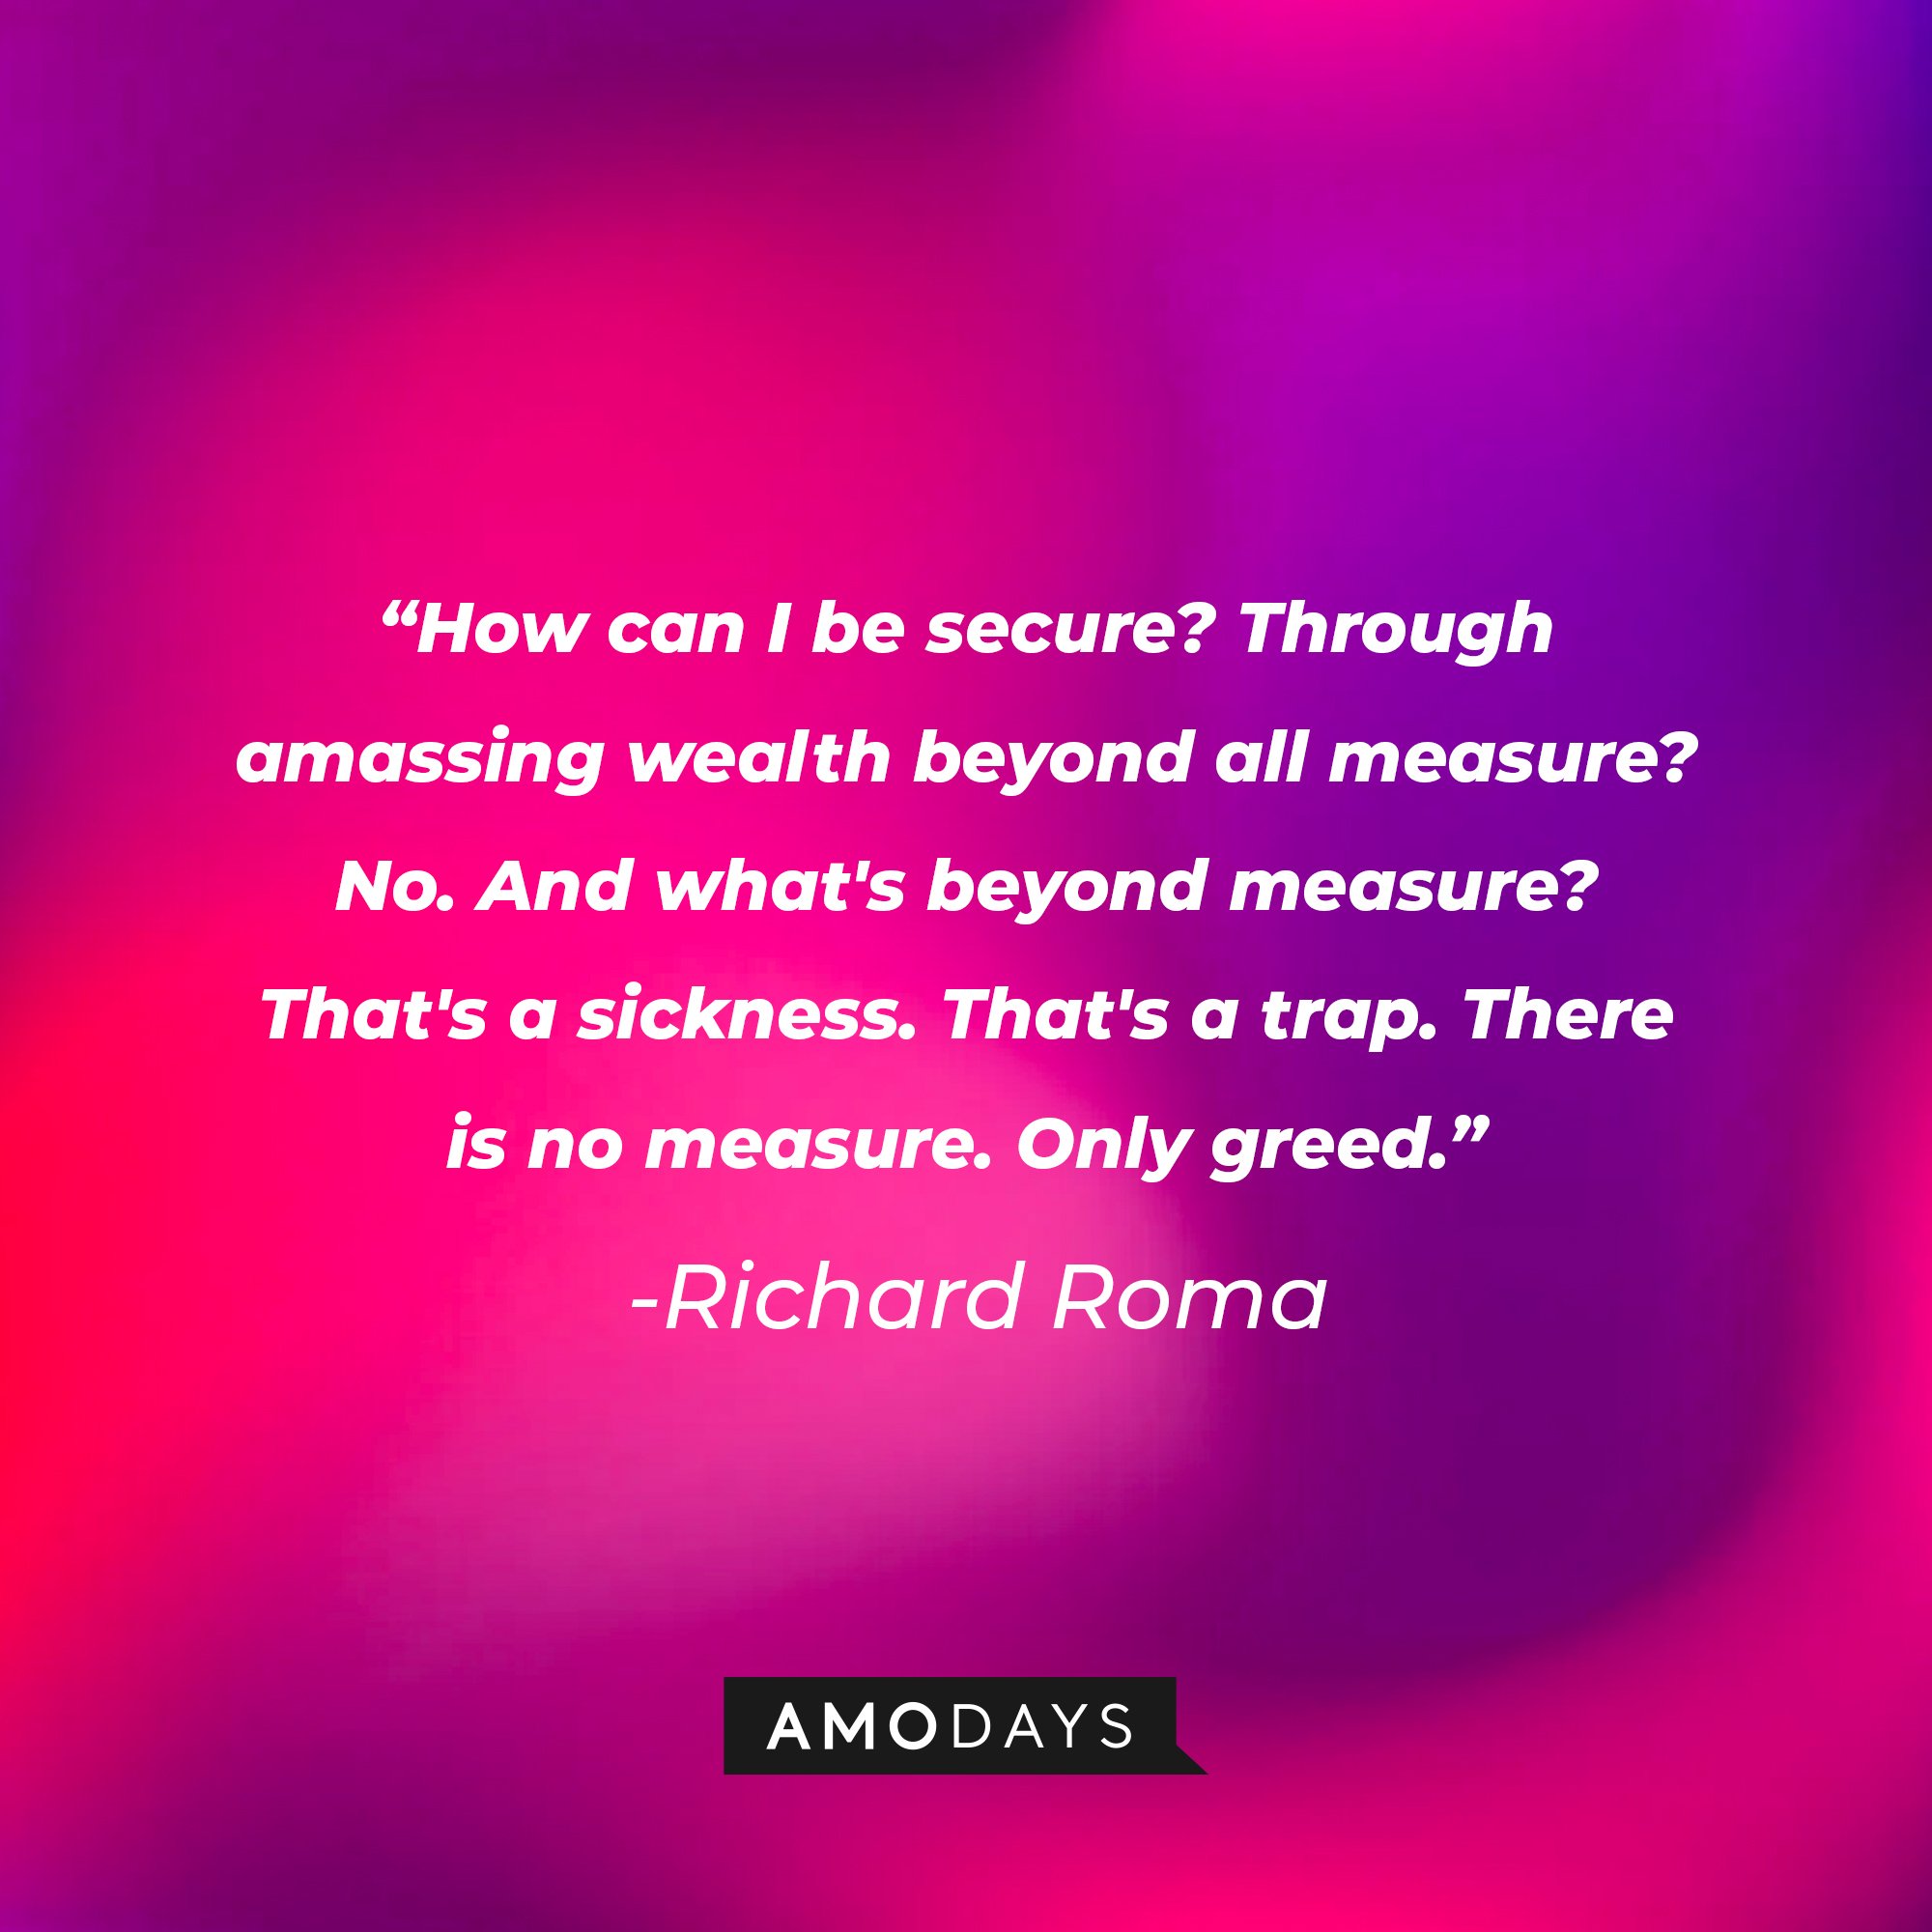 Richard Roma's quote: "How can I be secure? Through amassing wealth beyond all measure? No. And what's beyond measure? That's a sickness. That's a trap. There is no measure. Only greed." | Image: AmoDays